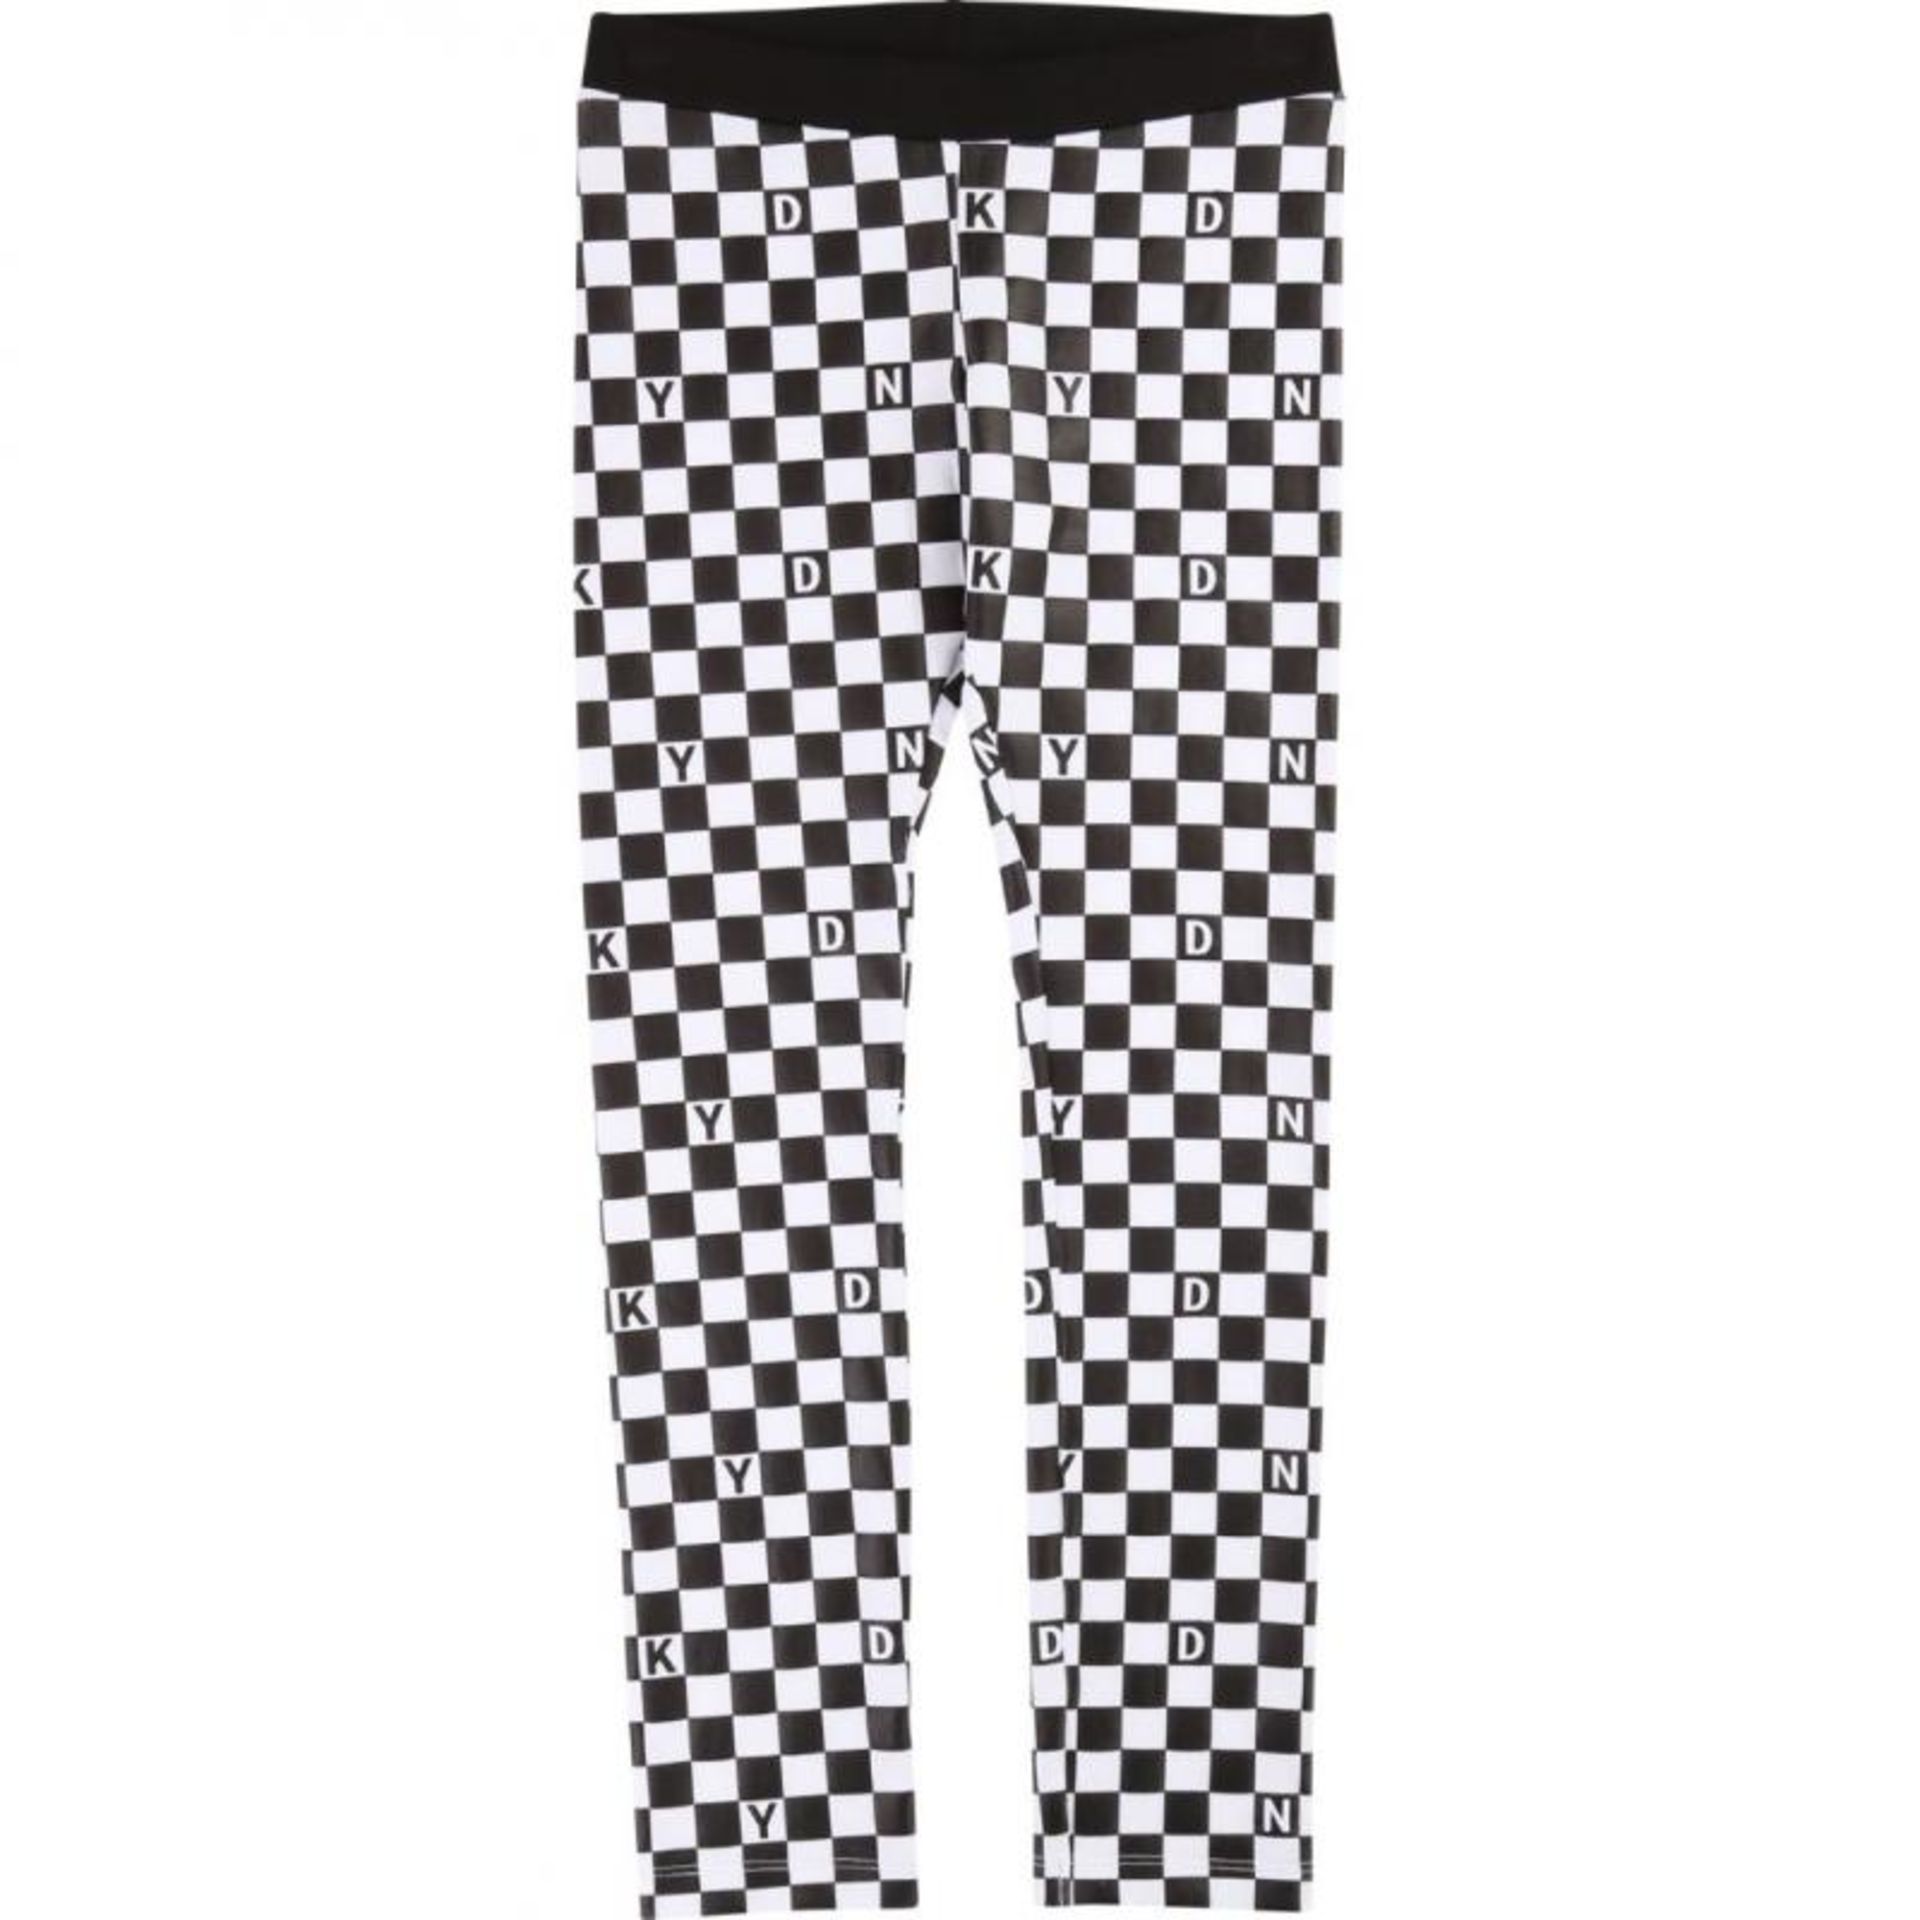 1 x DKNY Leggings - New With Tags - Size: 12A - Ref: D34959 - CL580 - NO VAT ON THE HAMMER - Locatio